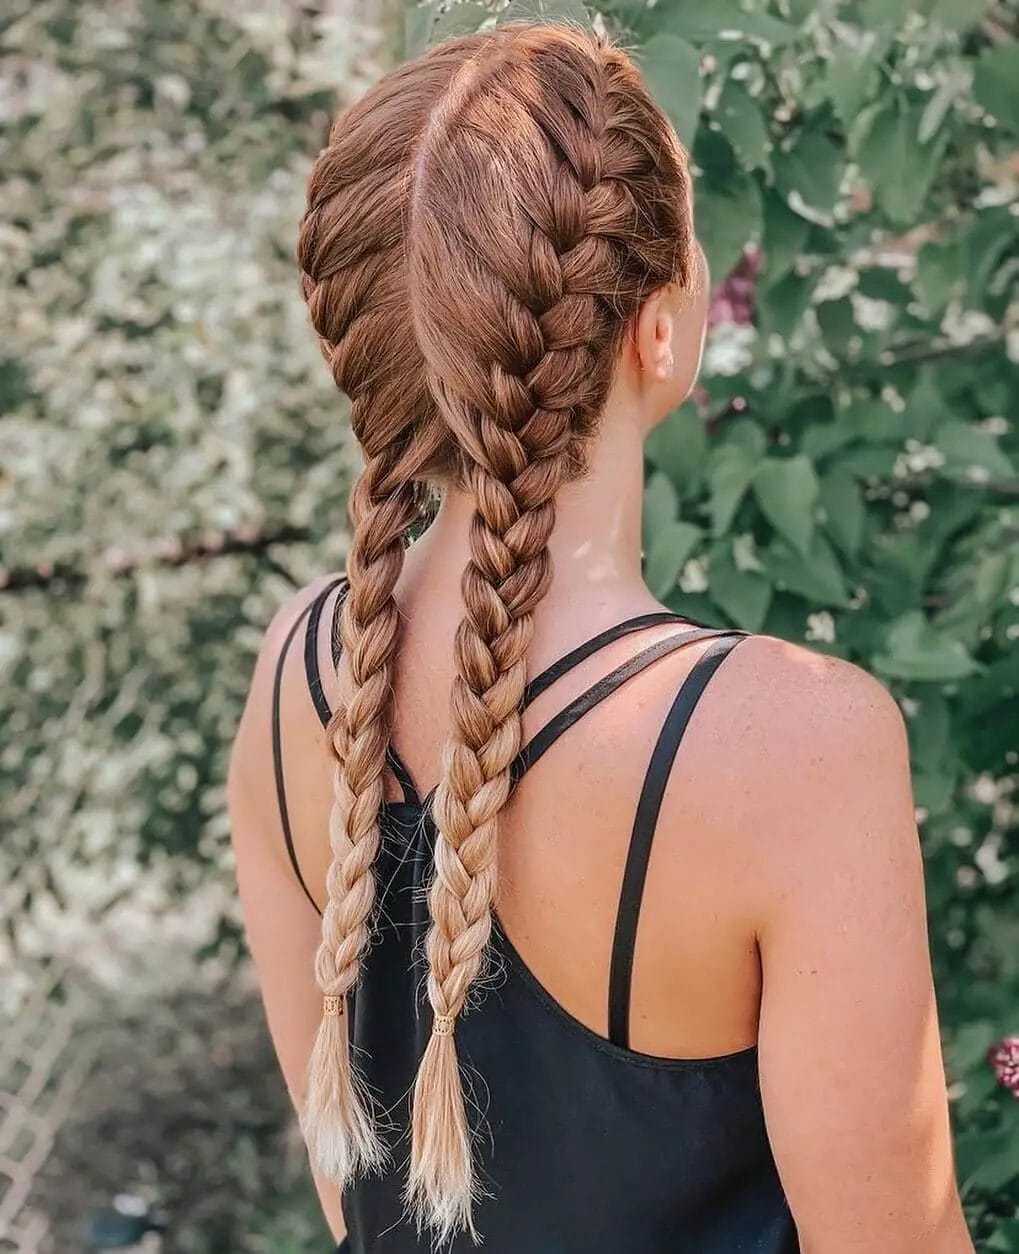 Symmetrical French braids with precision weave and blond ombrÃ© ends.